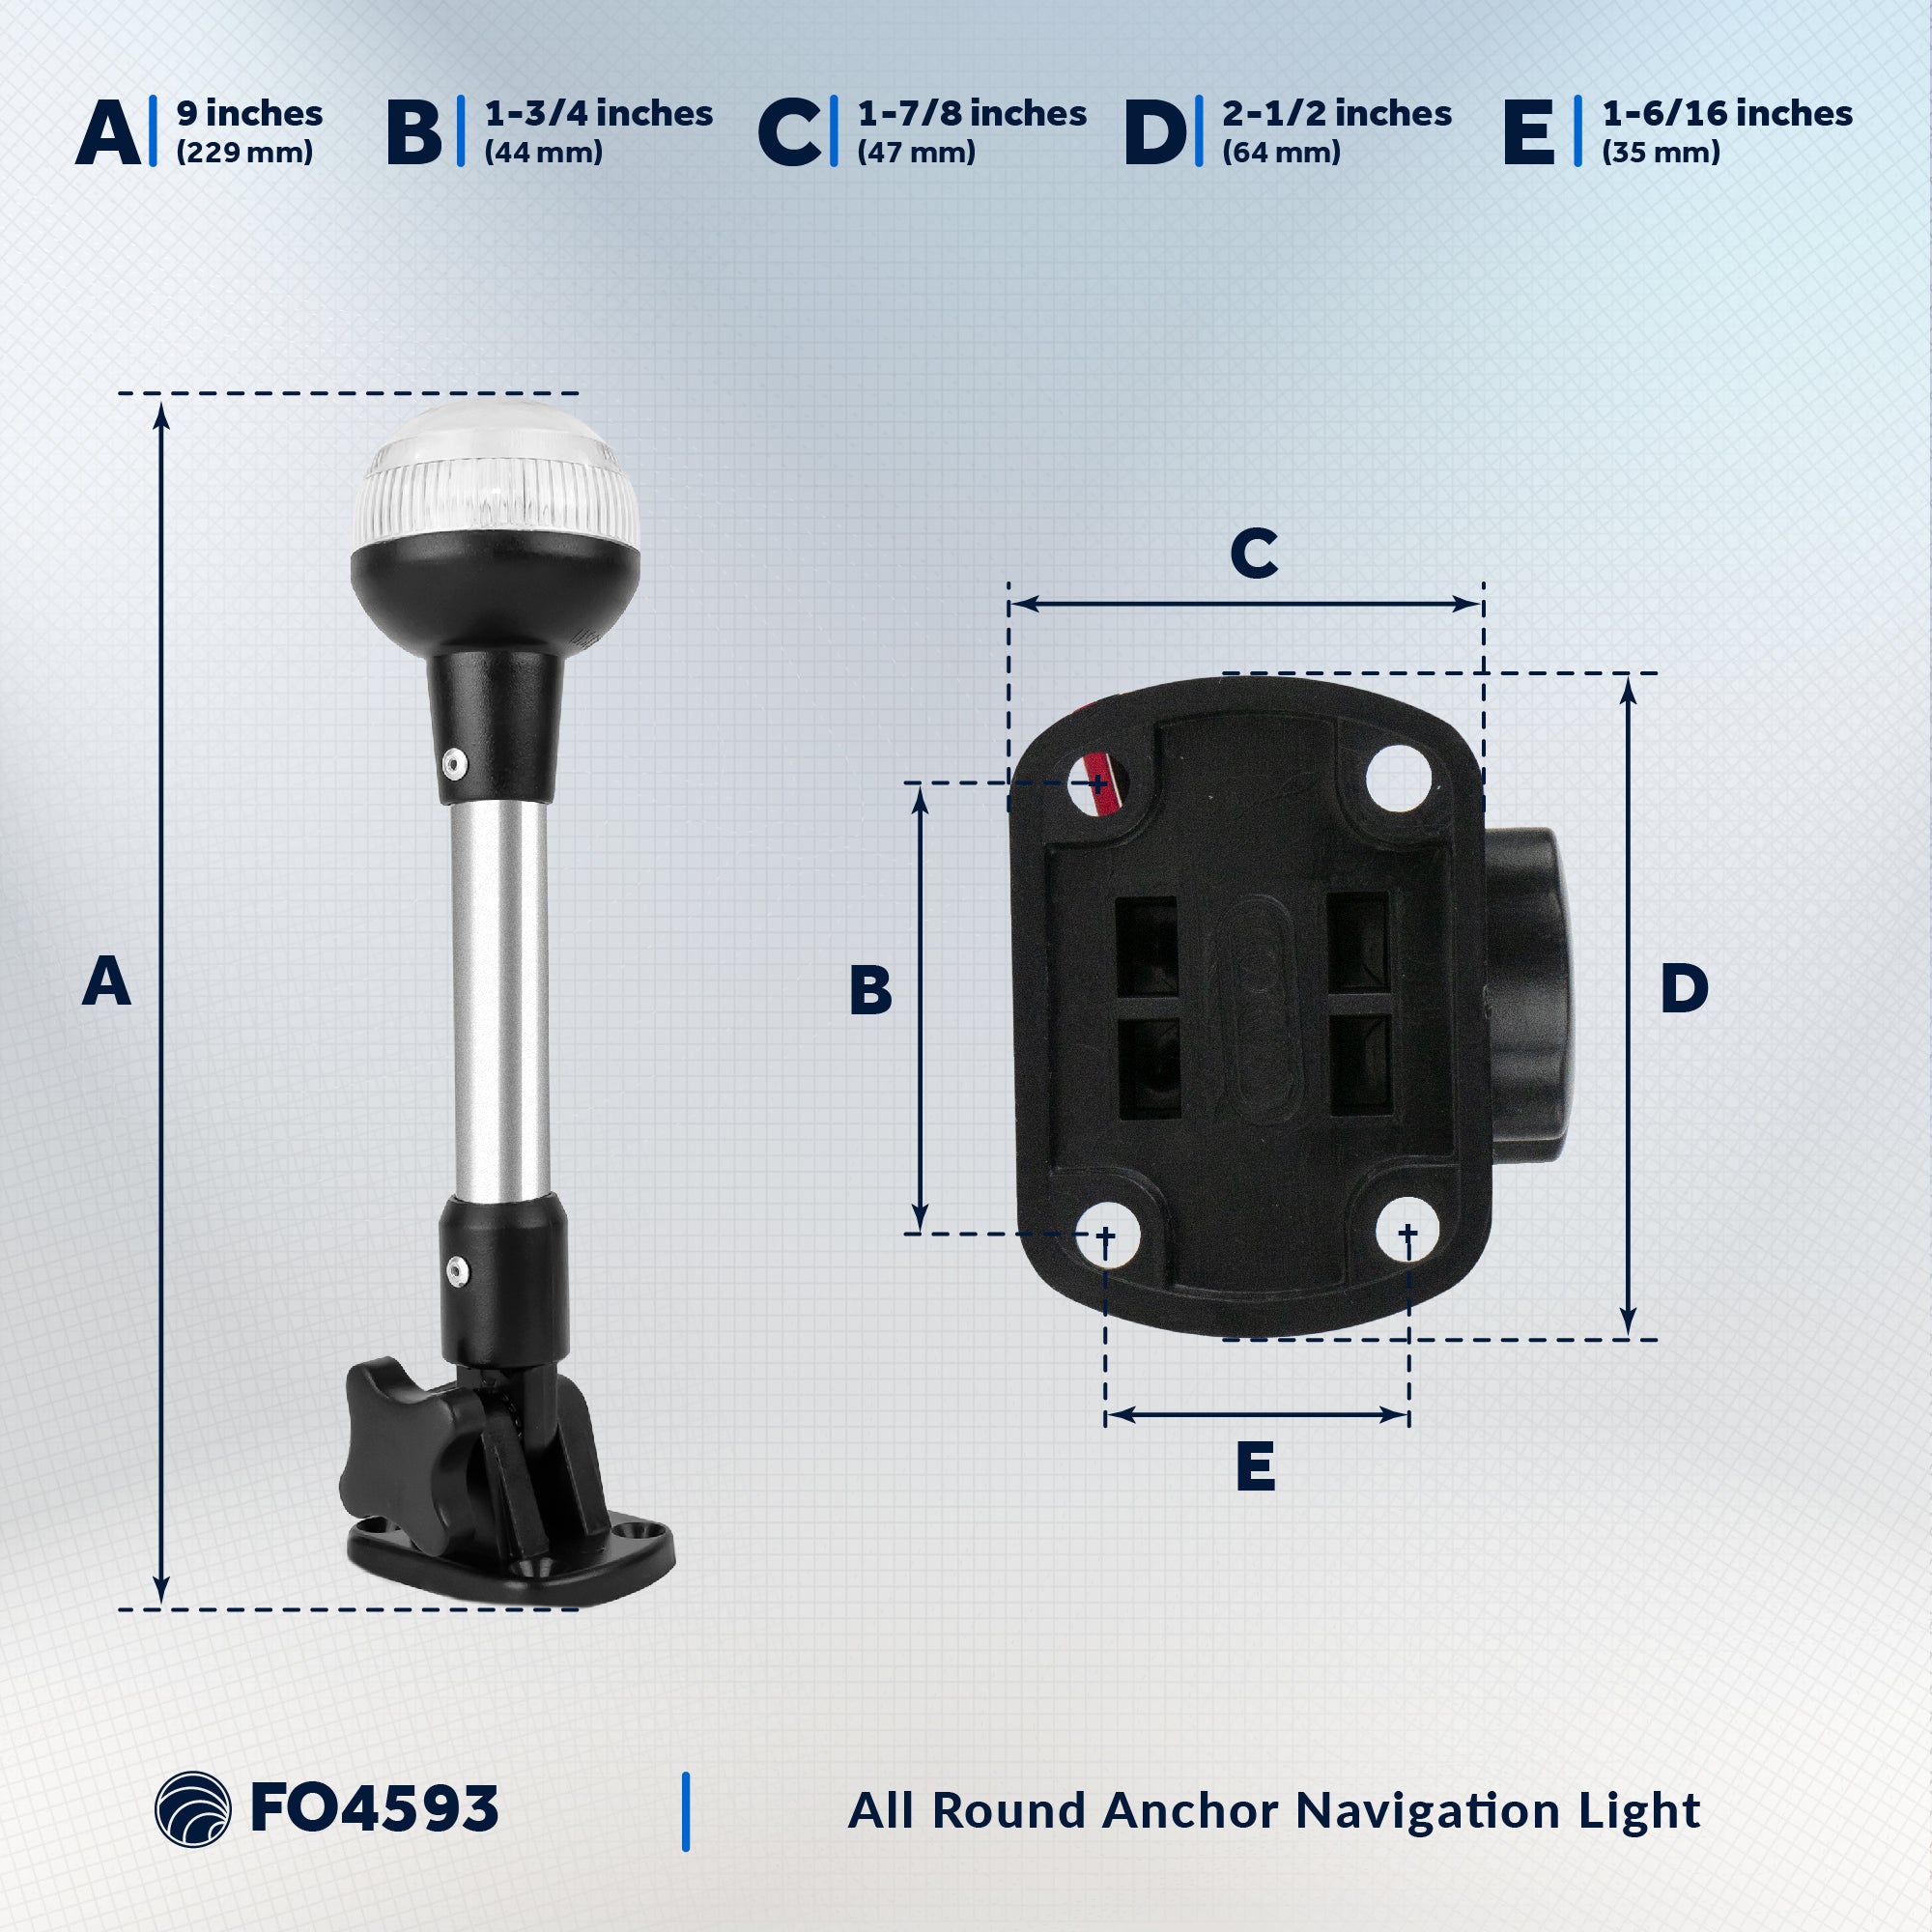 LED Anchor Navigation Light, 9" Fixed Mount, 2NM - FO4593